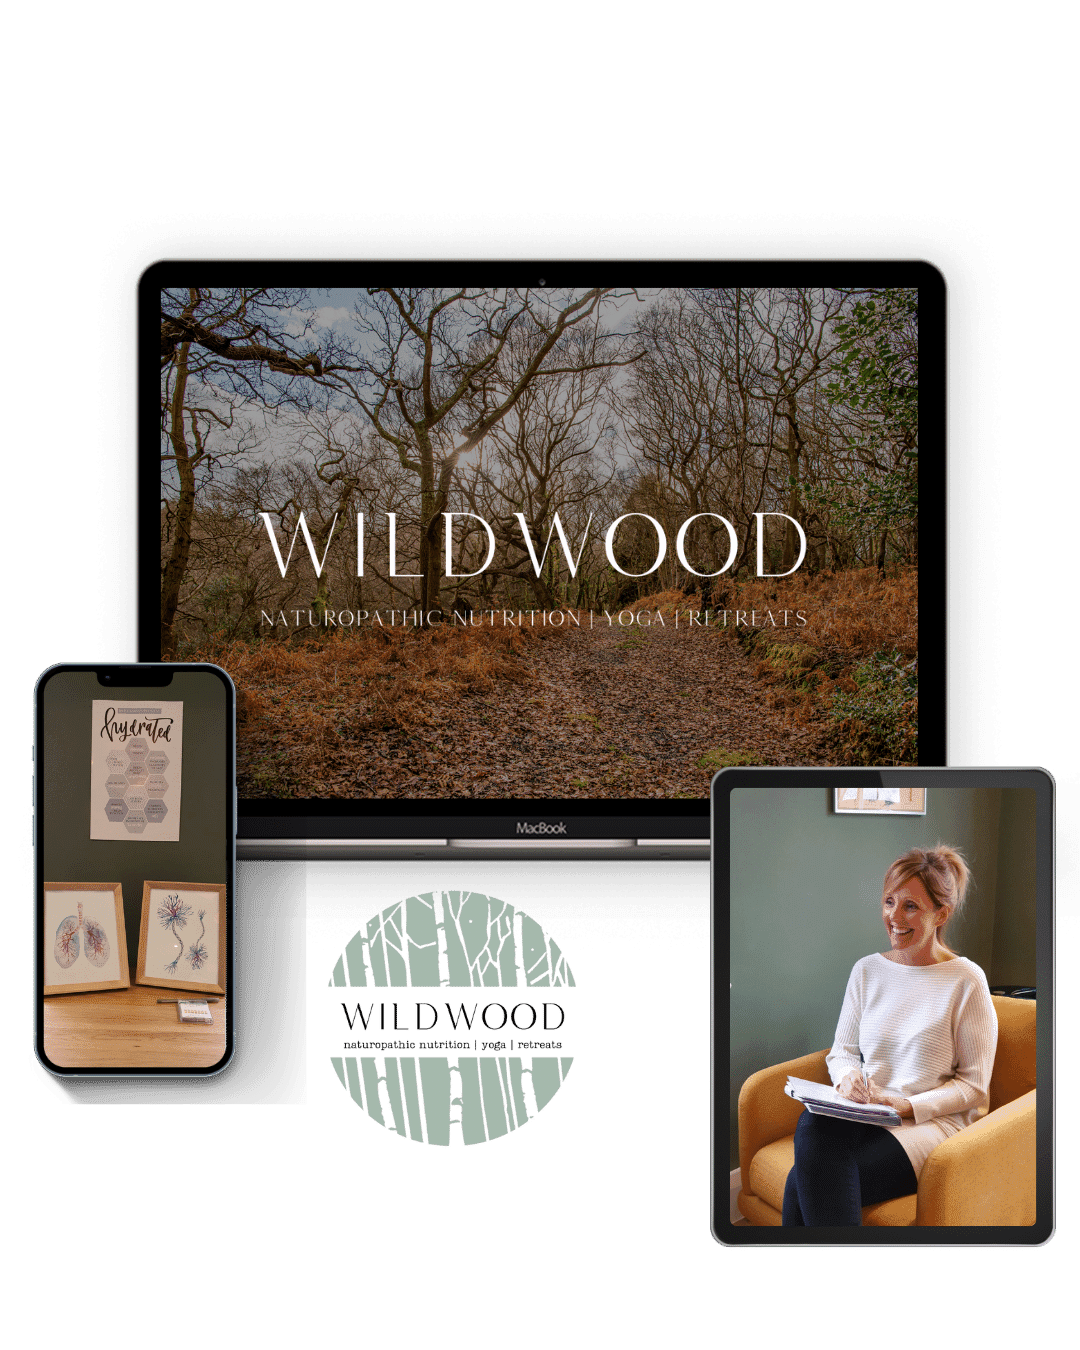 Wildwood Naturopathic nutritionist and yoga retreat brand design and web design